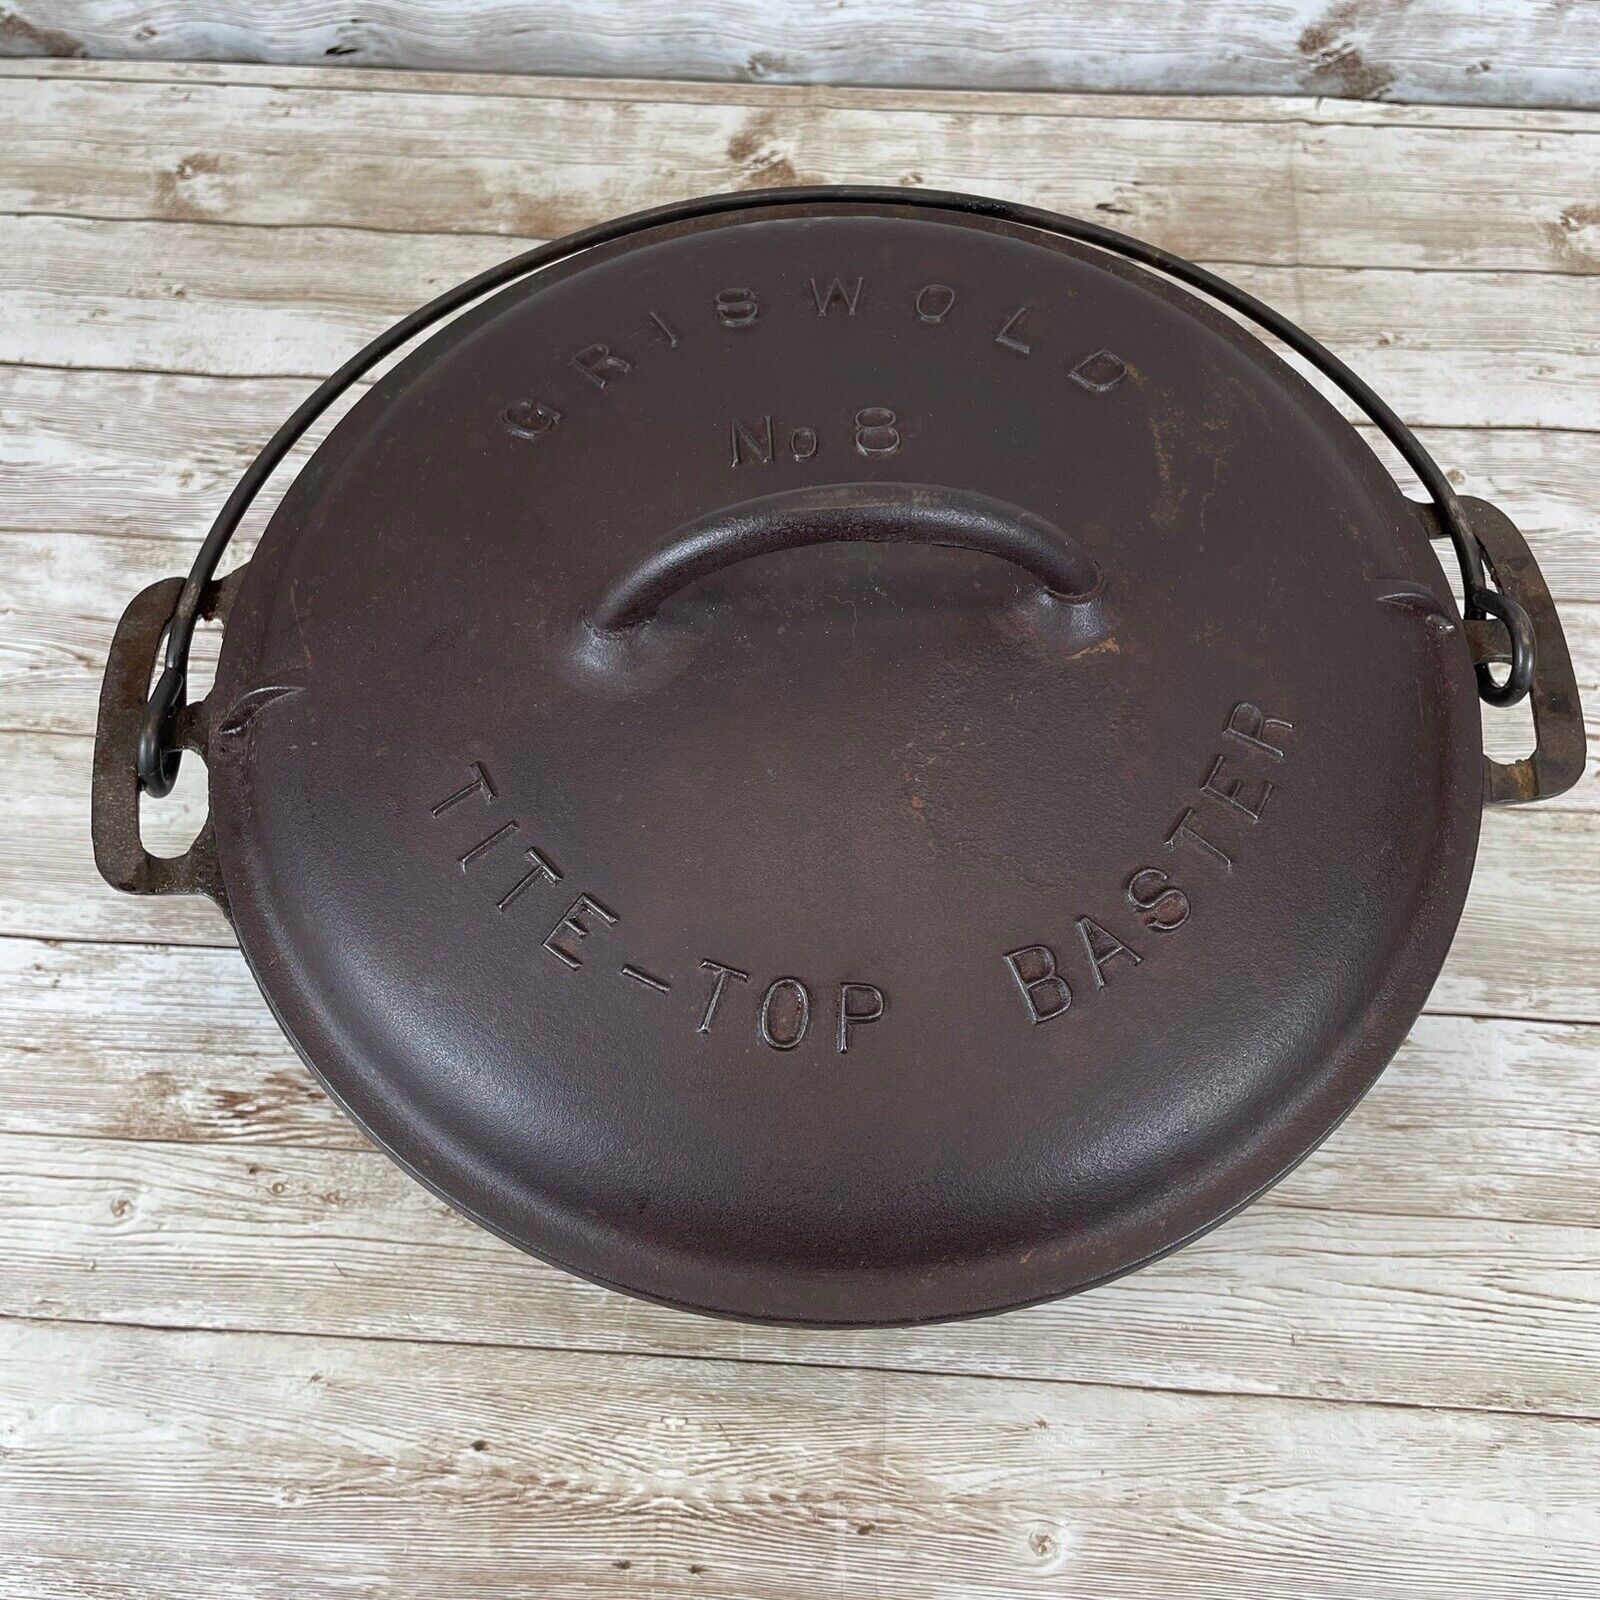 Vintage Griswold # 8 cast Iron Tite Top Dutch Oven # 833 With Lid # 2551 A